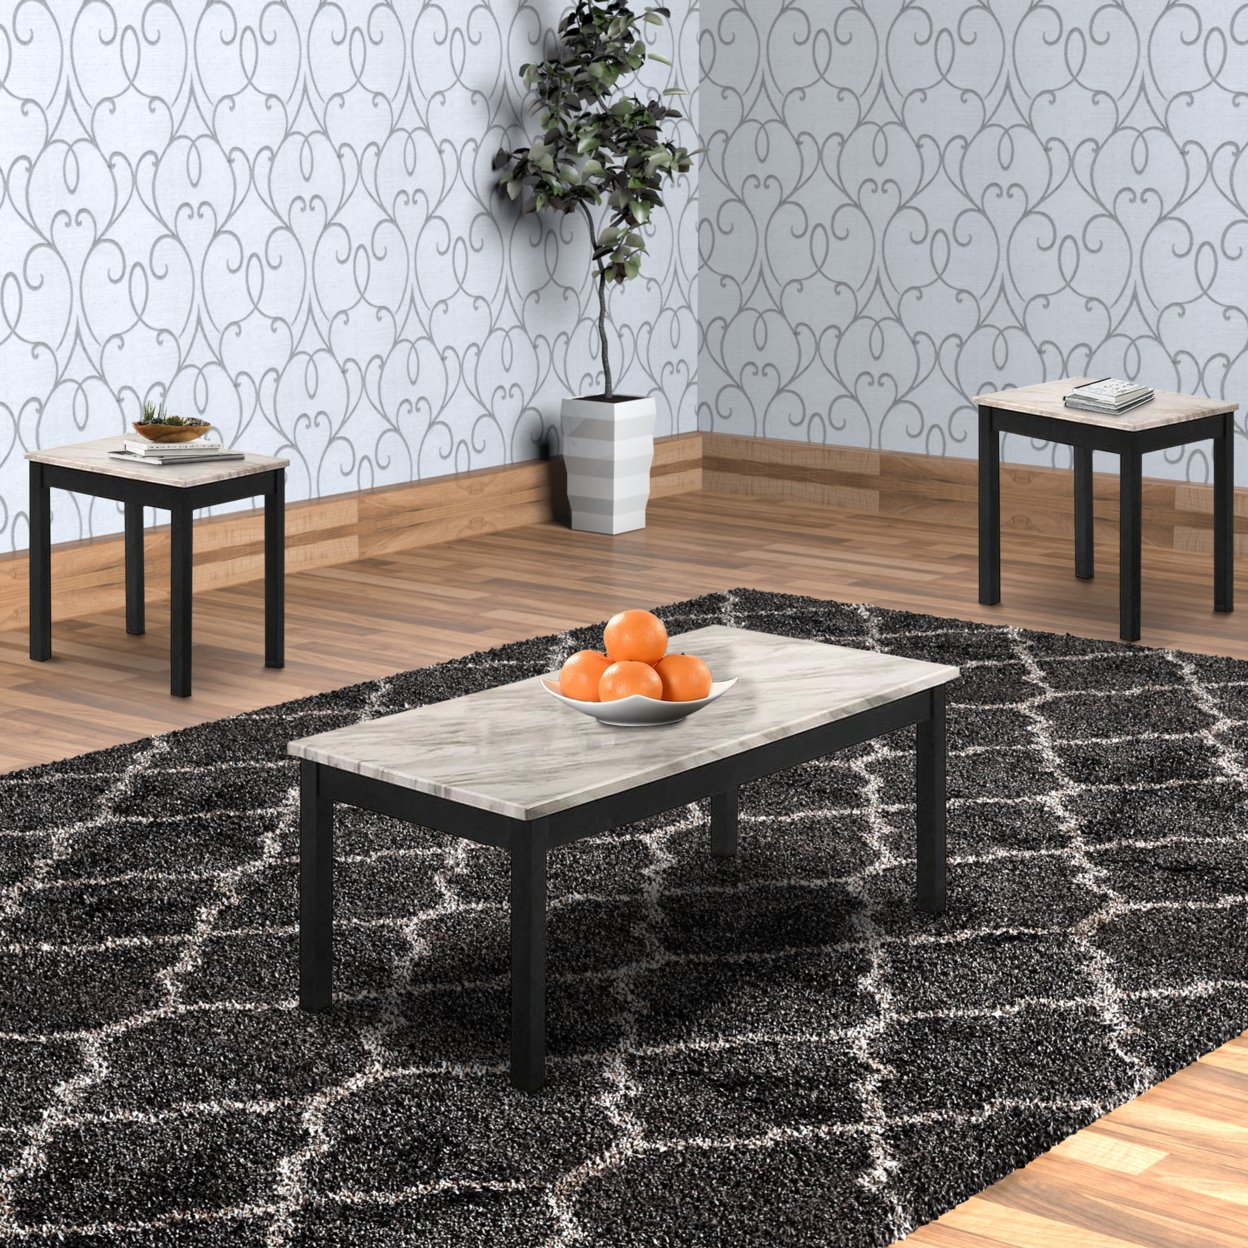 3 Piece Coffee Table And End Table With Faux Marble Top, Black And White- Saltoro Sherpi